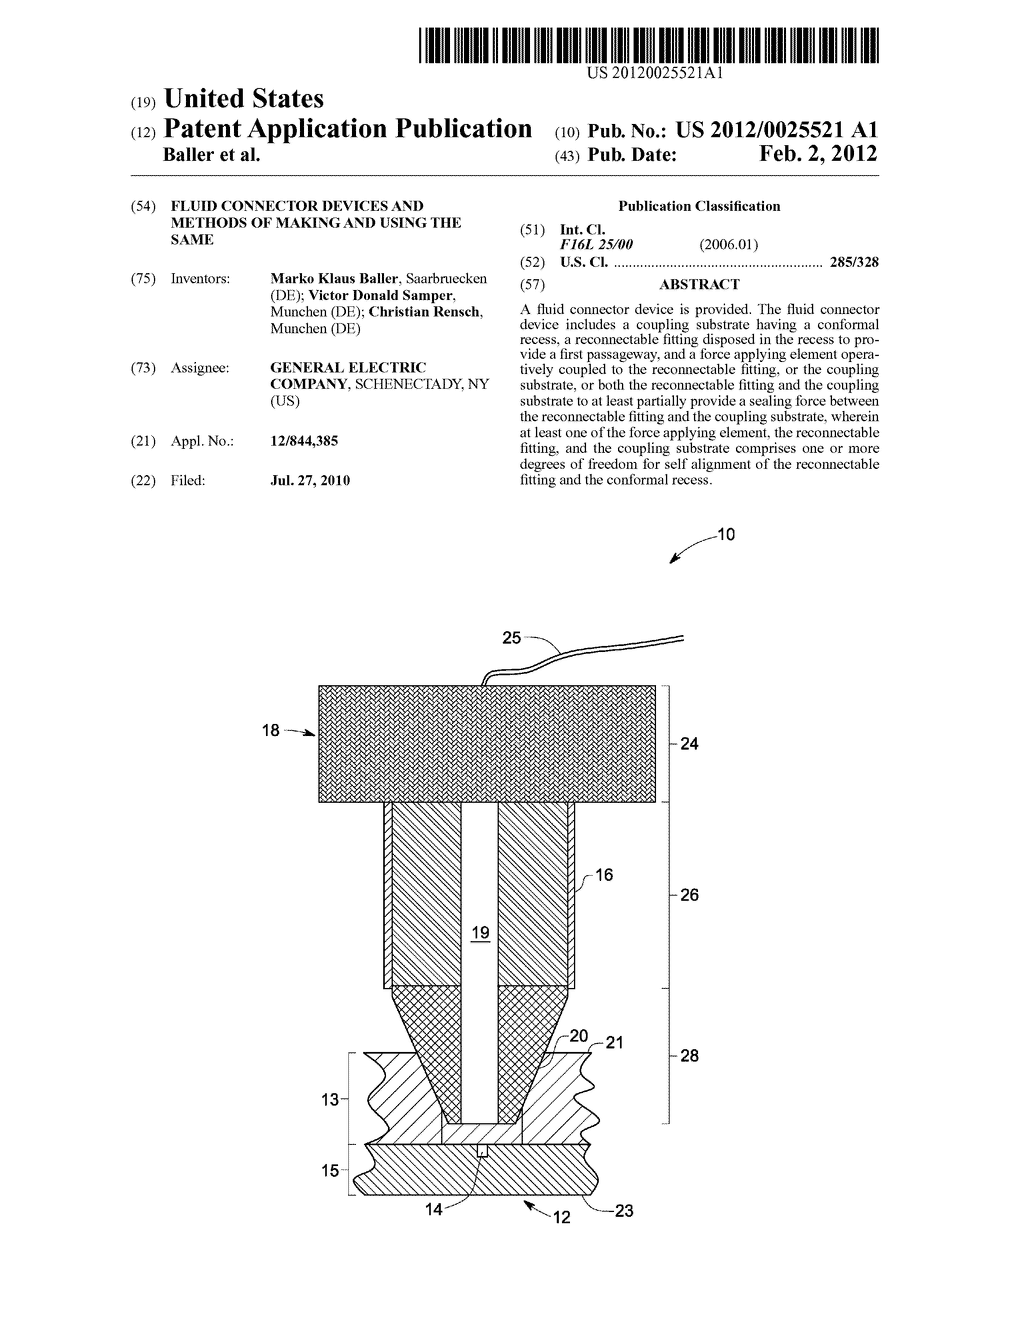 FLUID CONNECTOR DEVICES AND METHODS OF MAKING AND USING THE SAME - diagram, schematic, and image 01